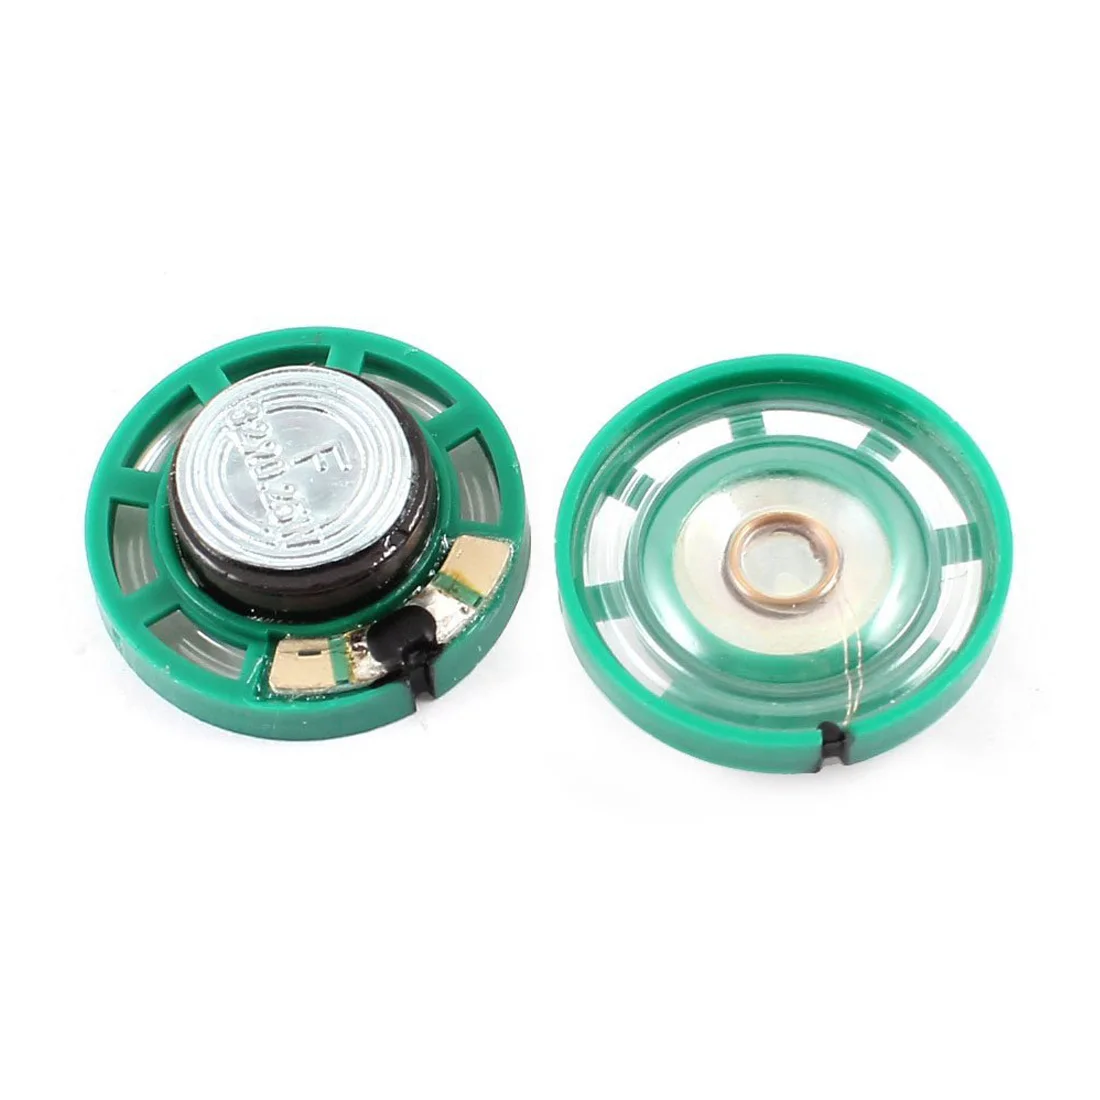 Portable 0.25 W 32 Ohm Plastic 4 Magnetic Speaker with 27 mm Diameter Green + Silver